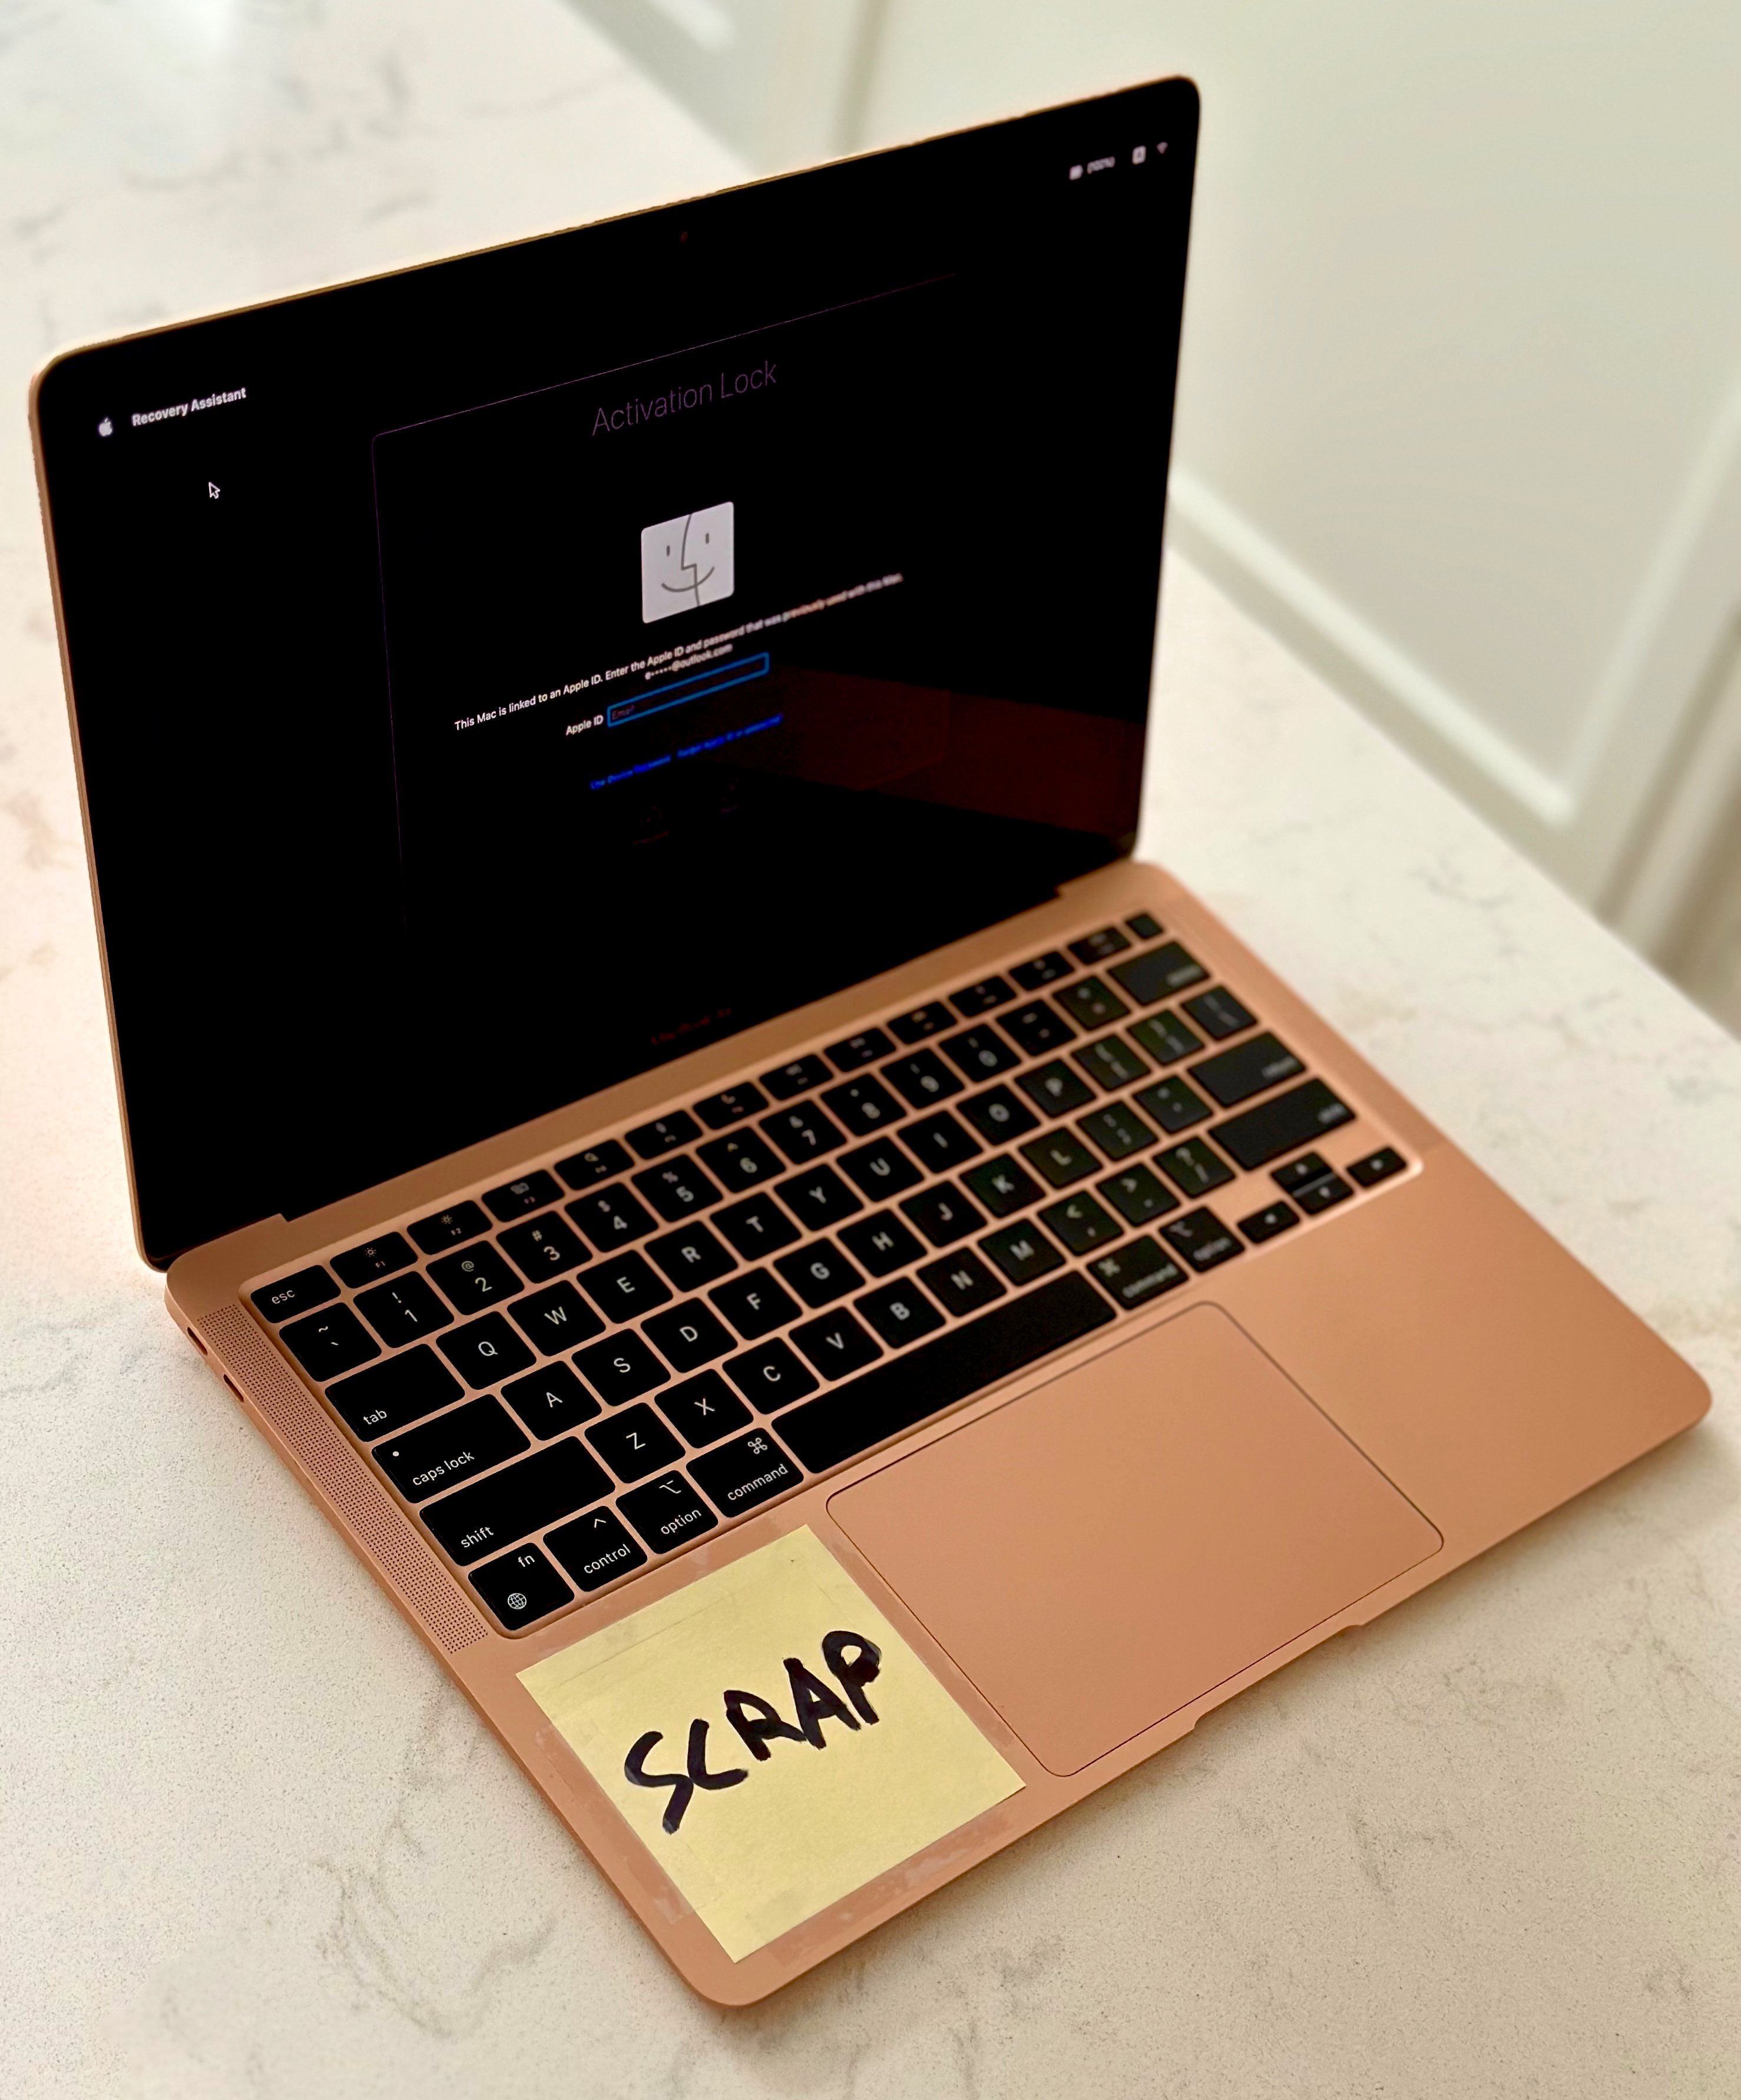 Perfectly Good MacBooks From 2020 Are Being Sold for Scrap Because of Activation Lock